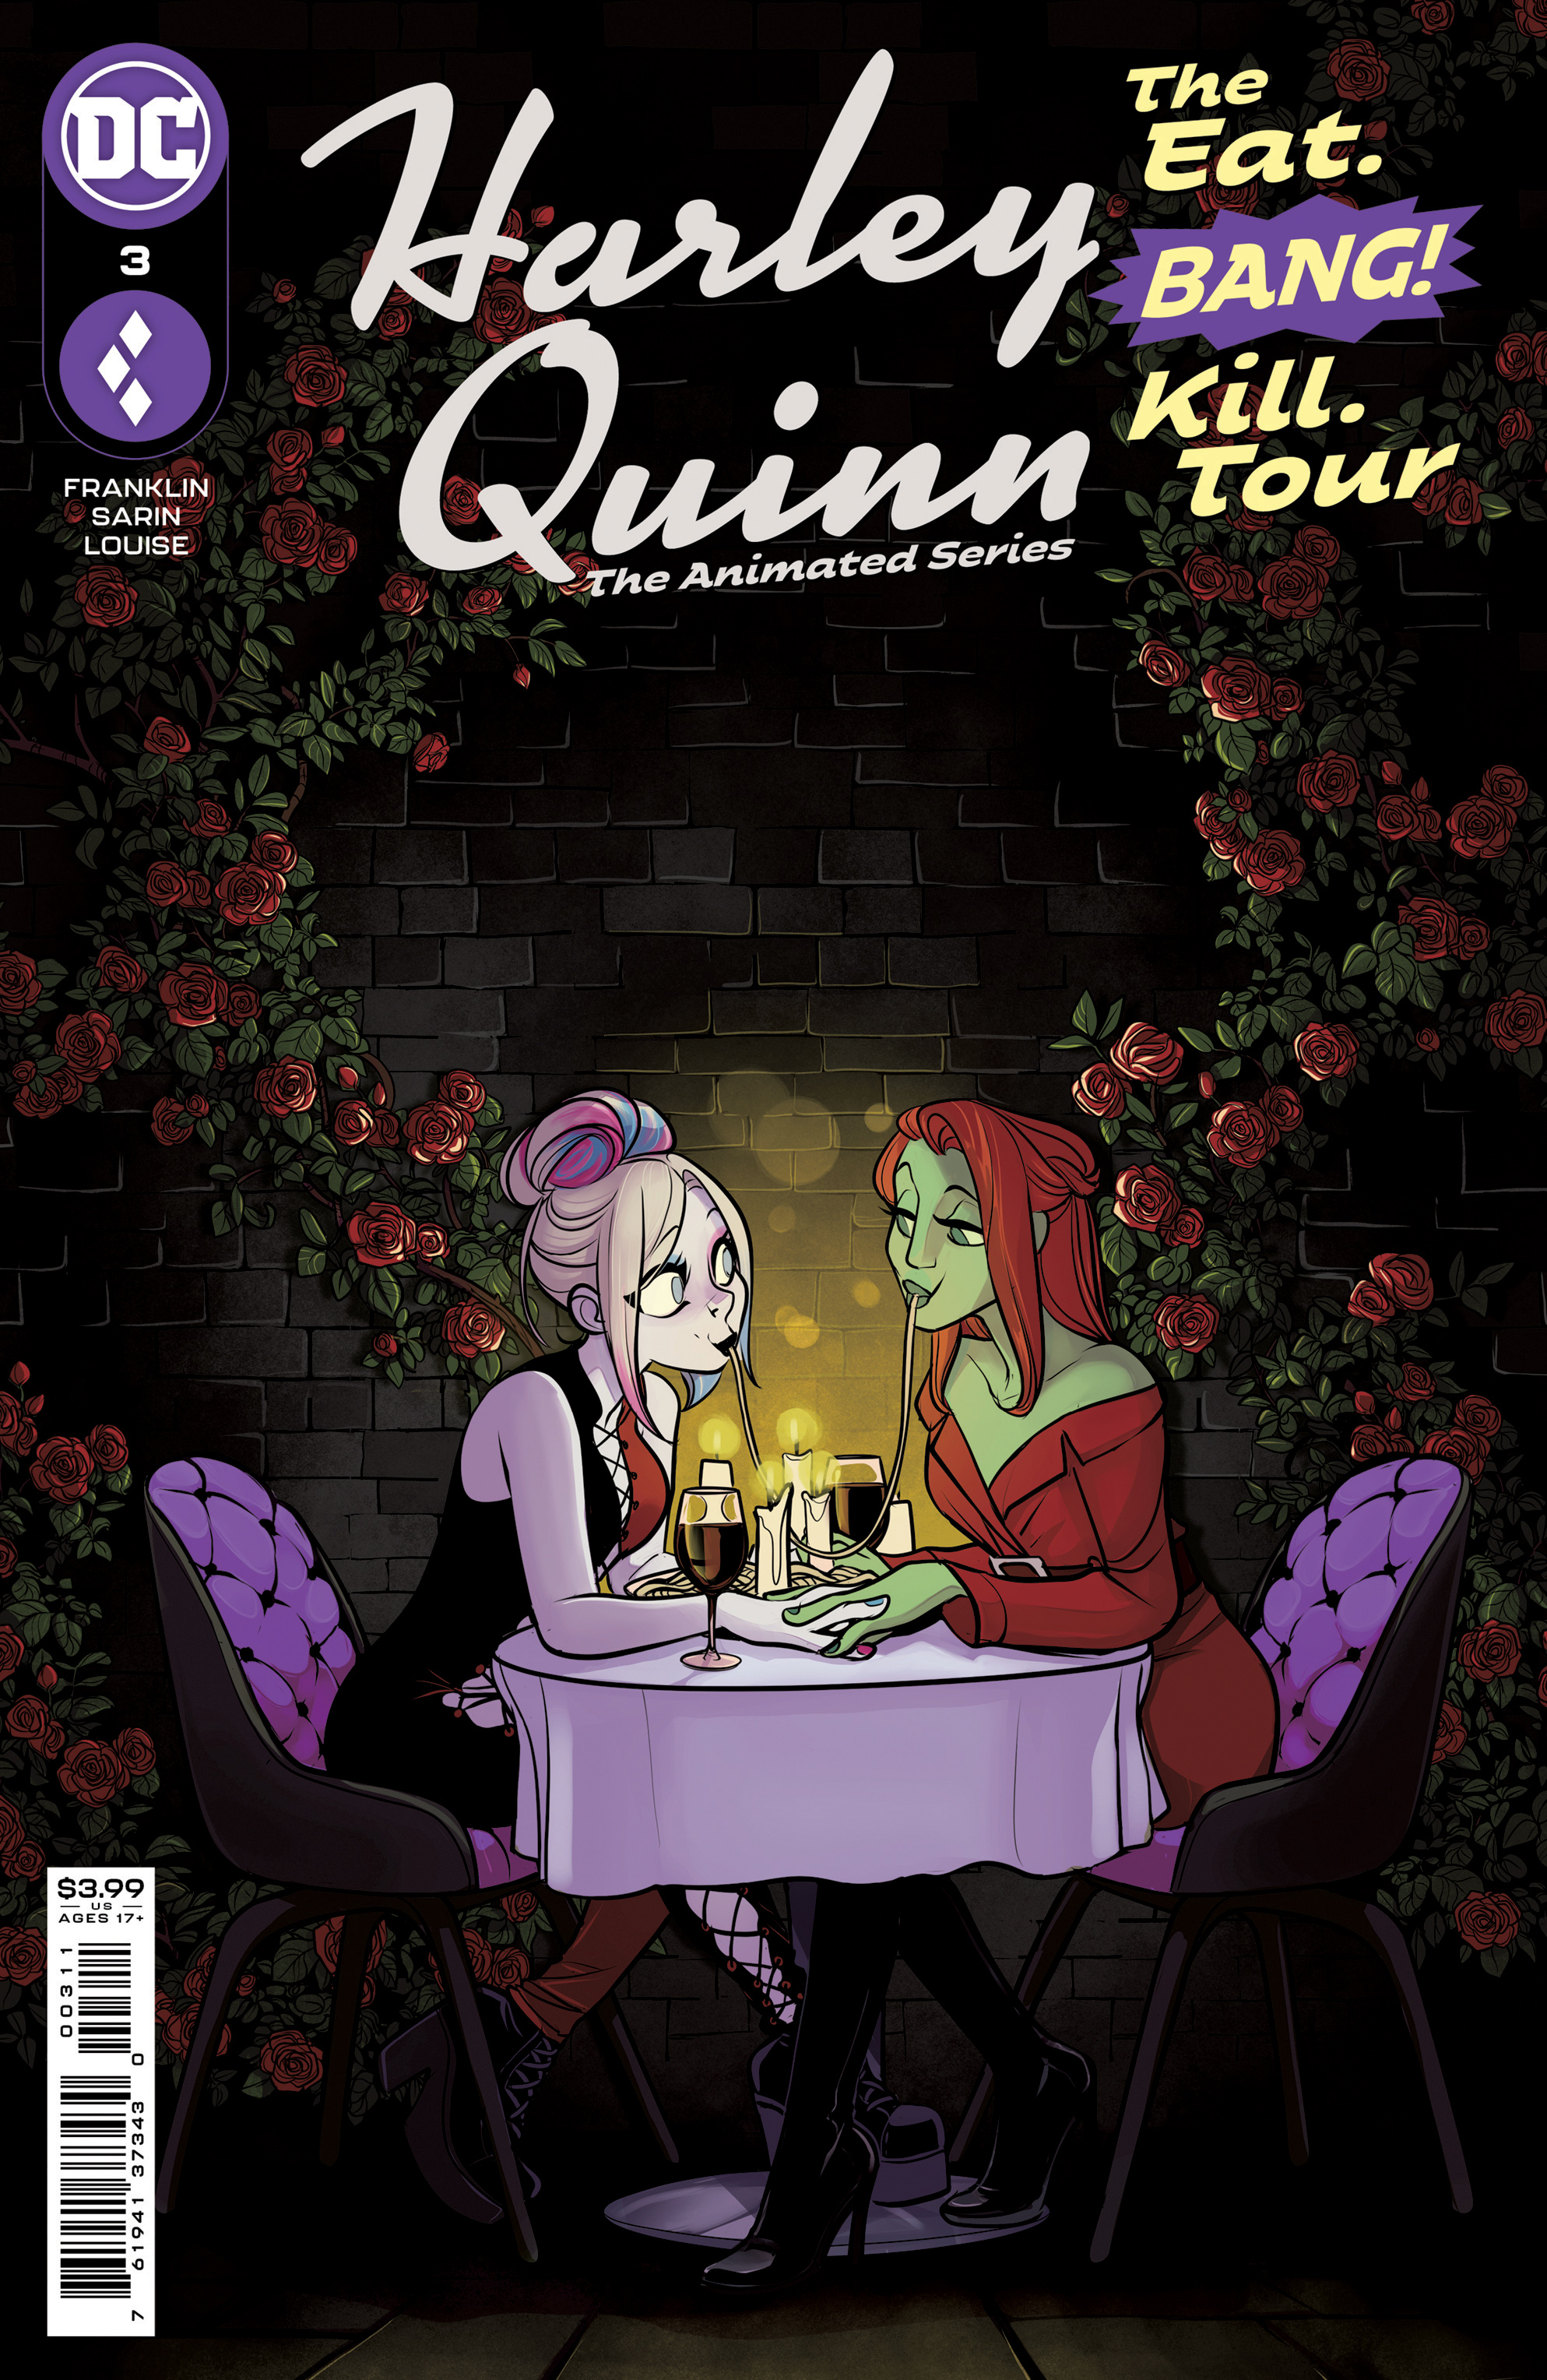 Harley Quinn The Animated Series The Eat Bang Kill Tour #3 Cover A Max Sarin (Mature) (Of 6)